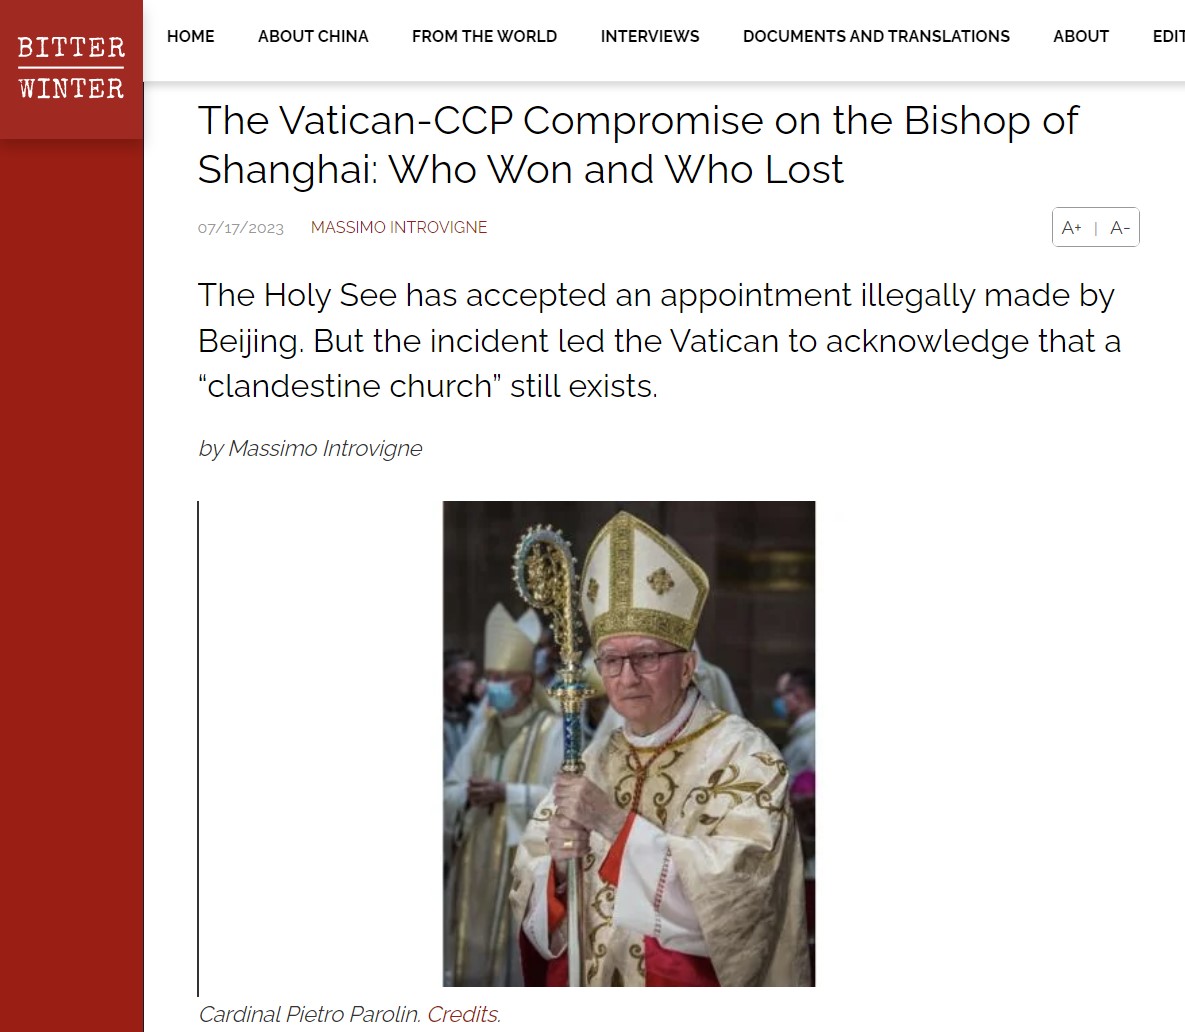 The Vatican-CCP Compromise on the Bishop of Shanghai: Who Won and Who Lost